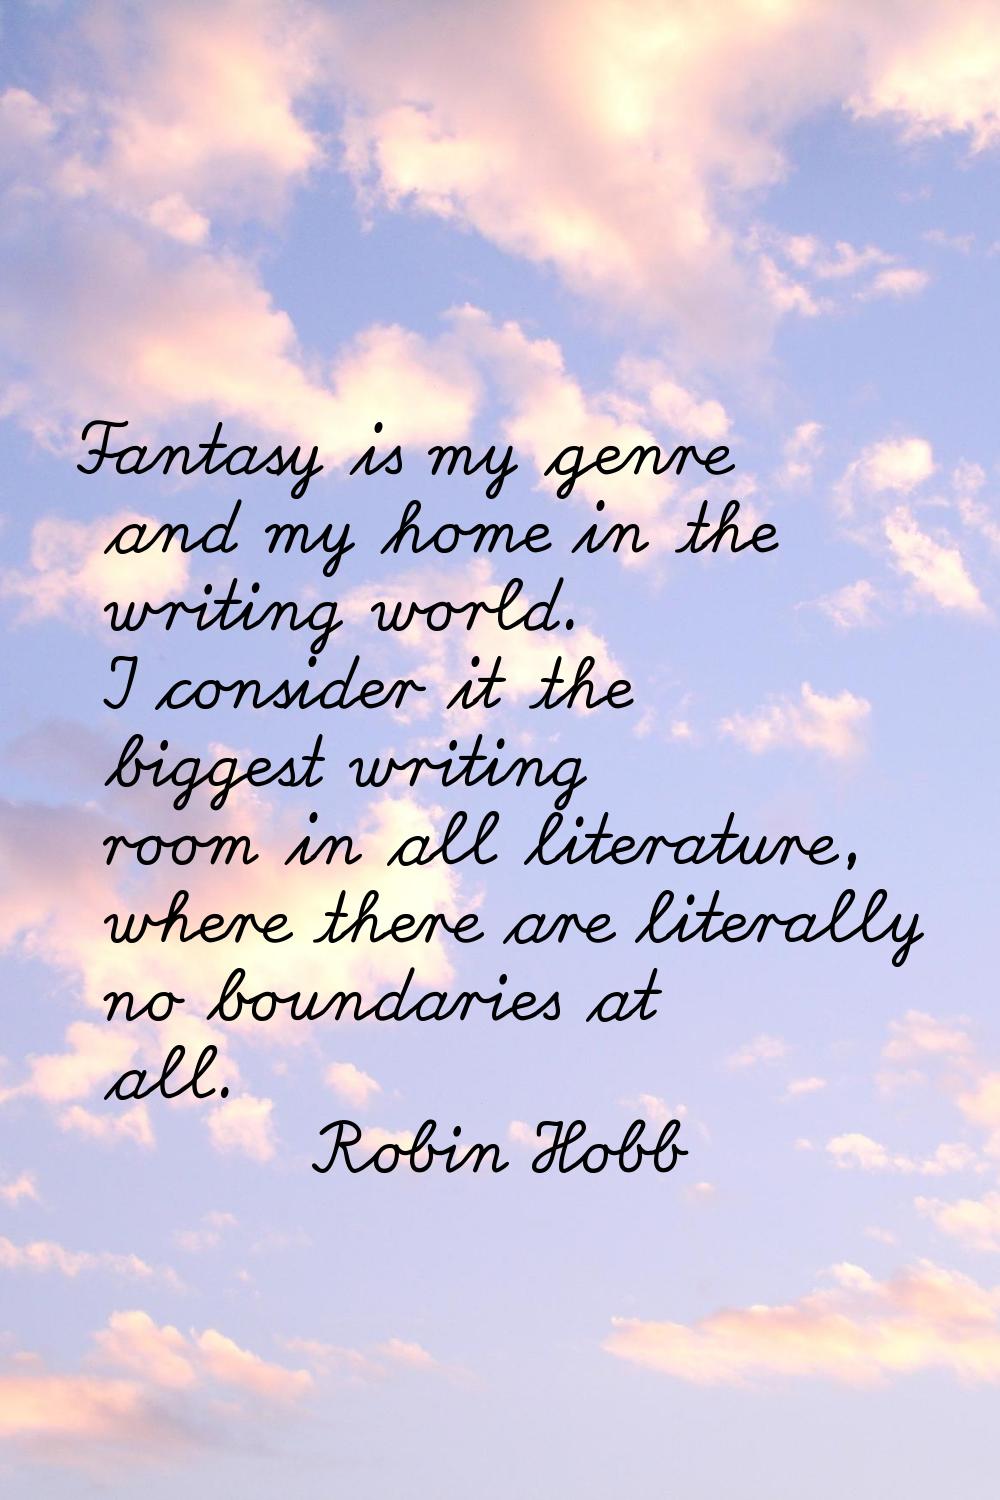 Fantasy is my genre and my home in the writing world. I consider it the biggest writing room in all